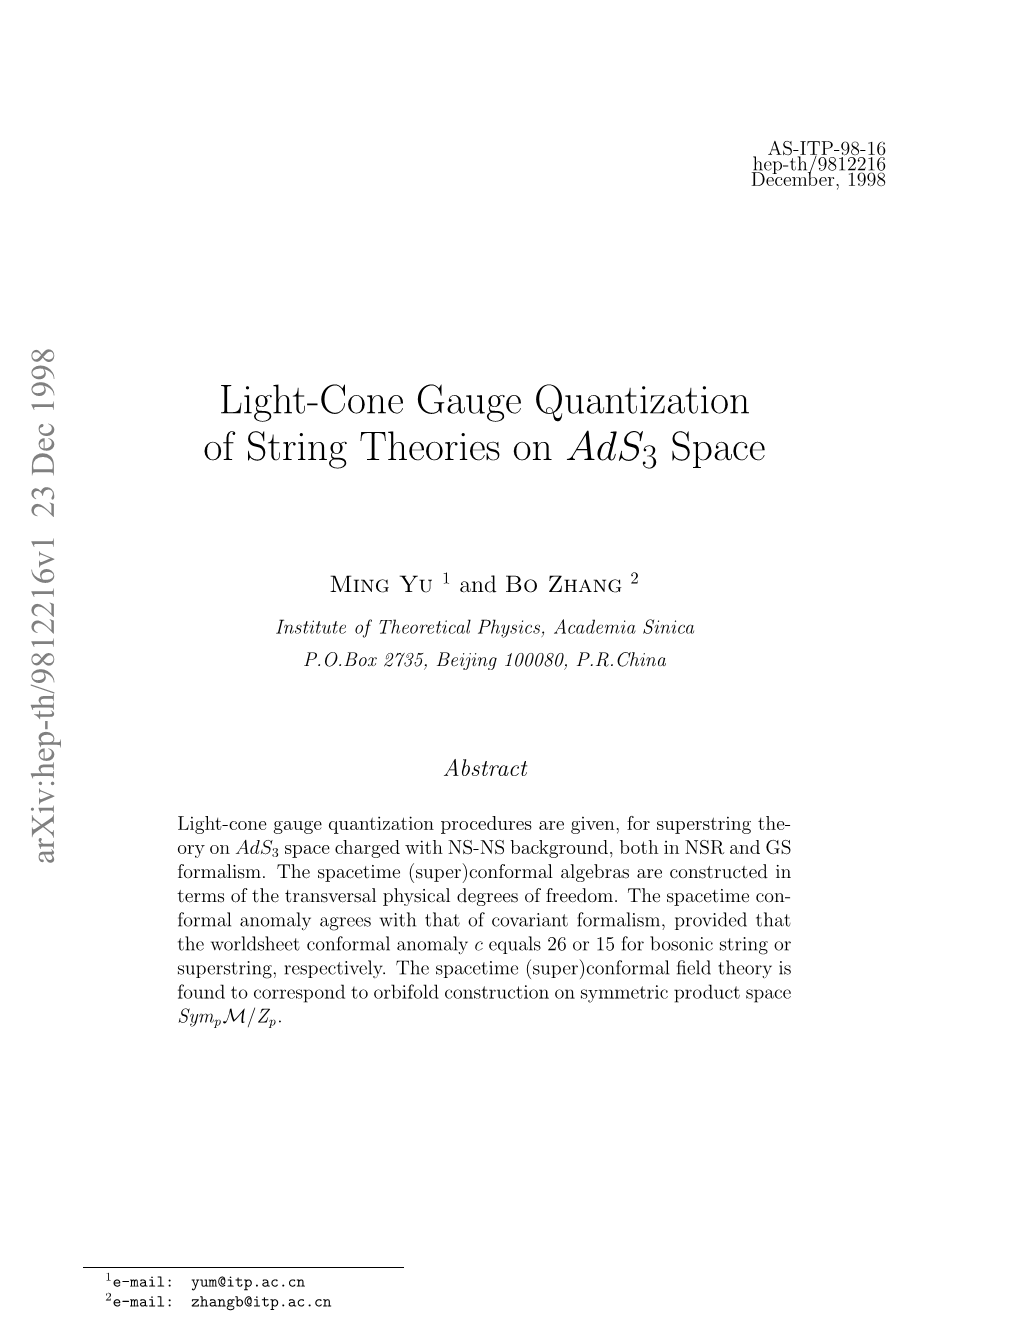 Light-Cone Gauge Quantization of String Theories on $ Ads 3 $ Space